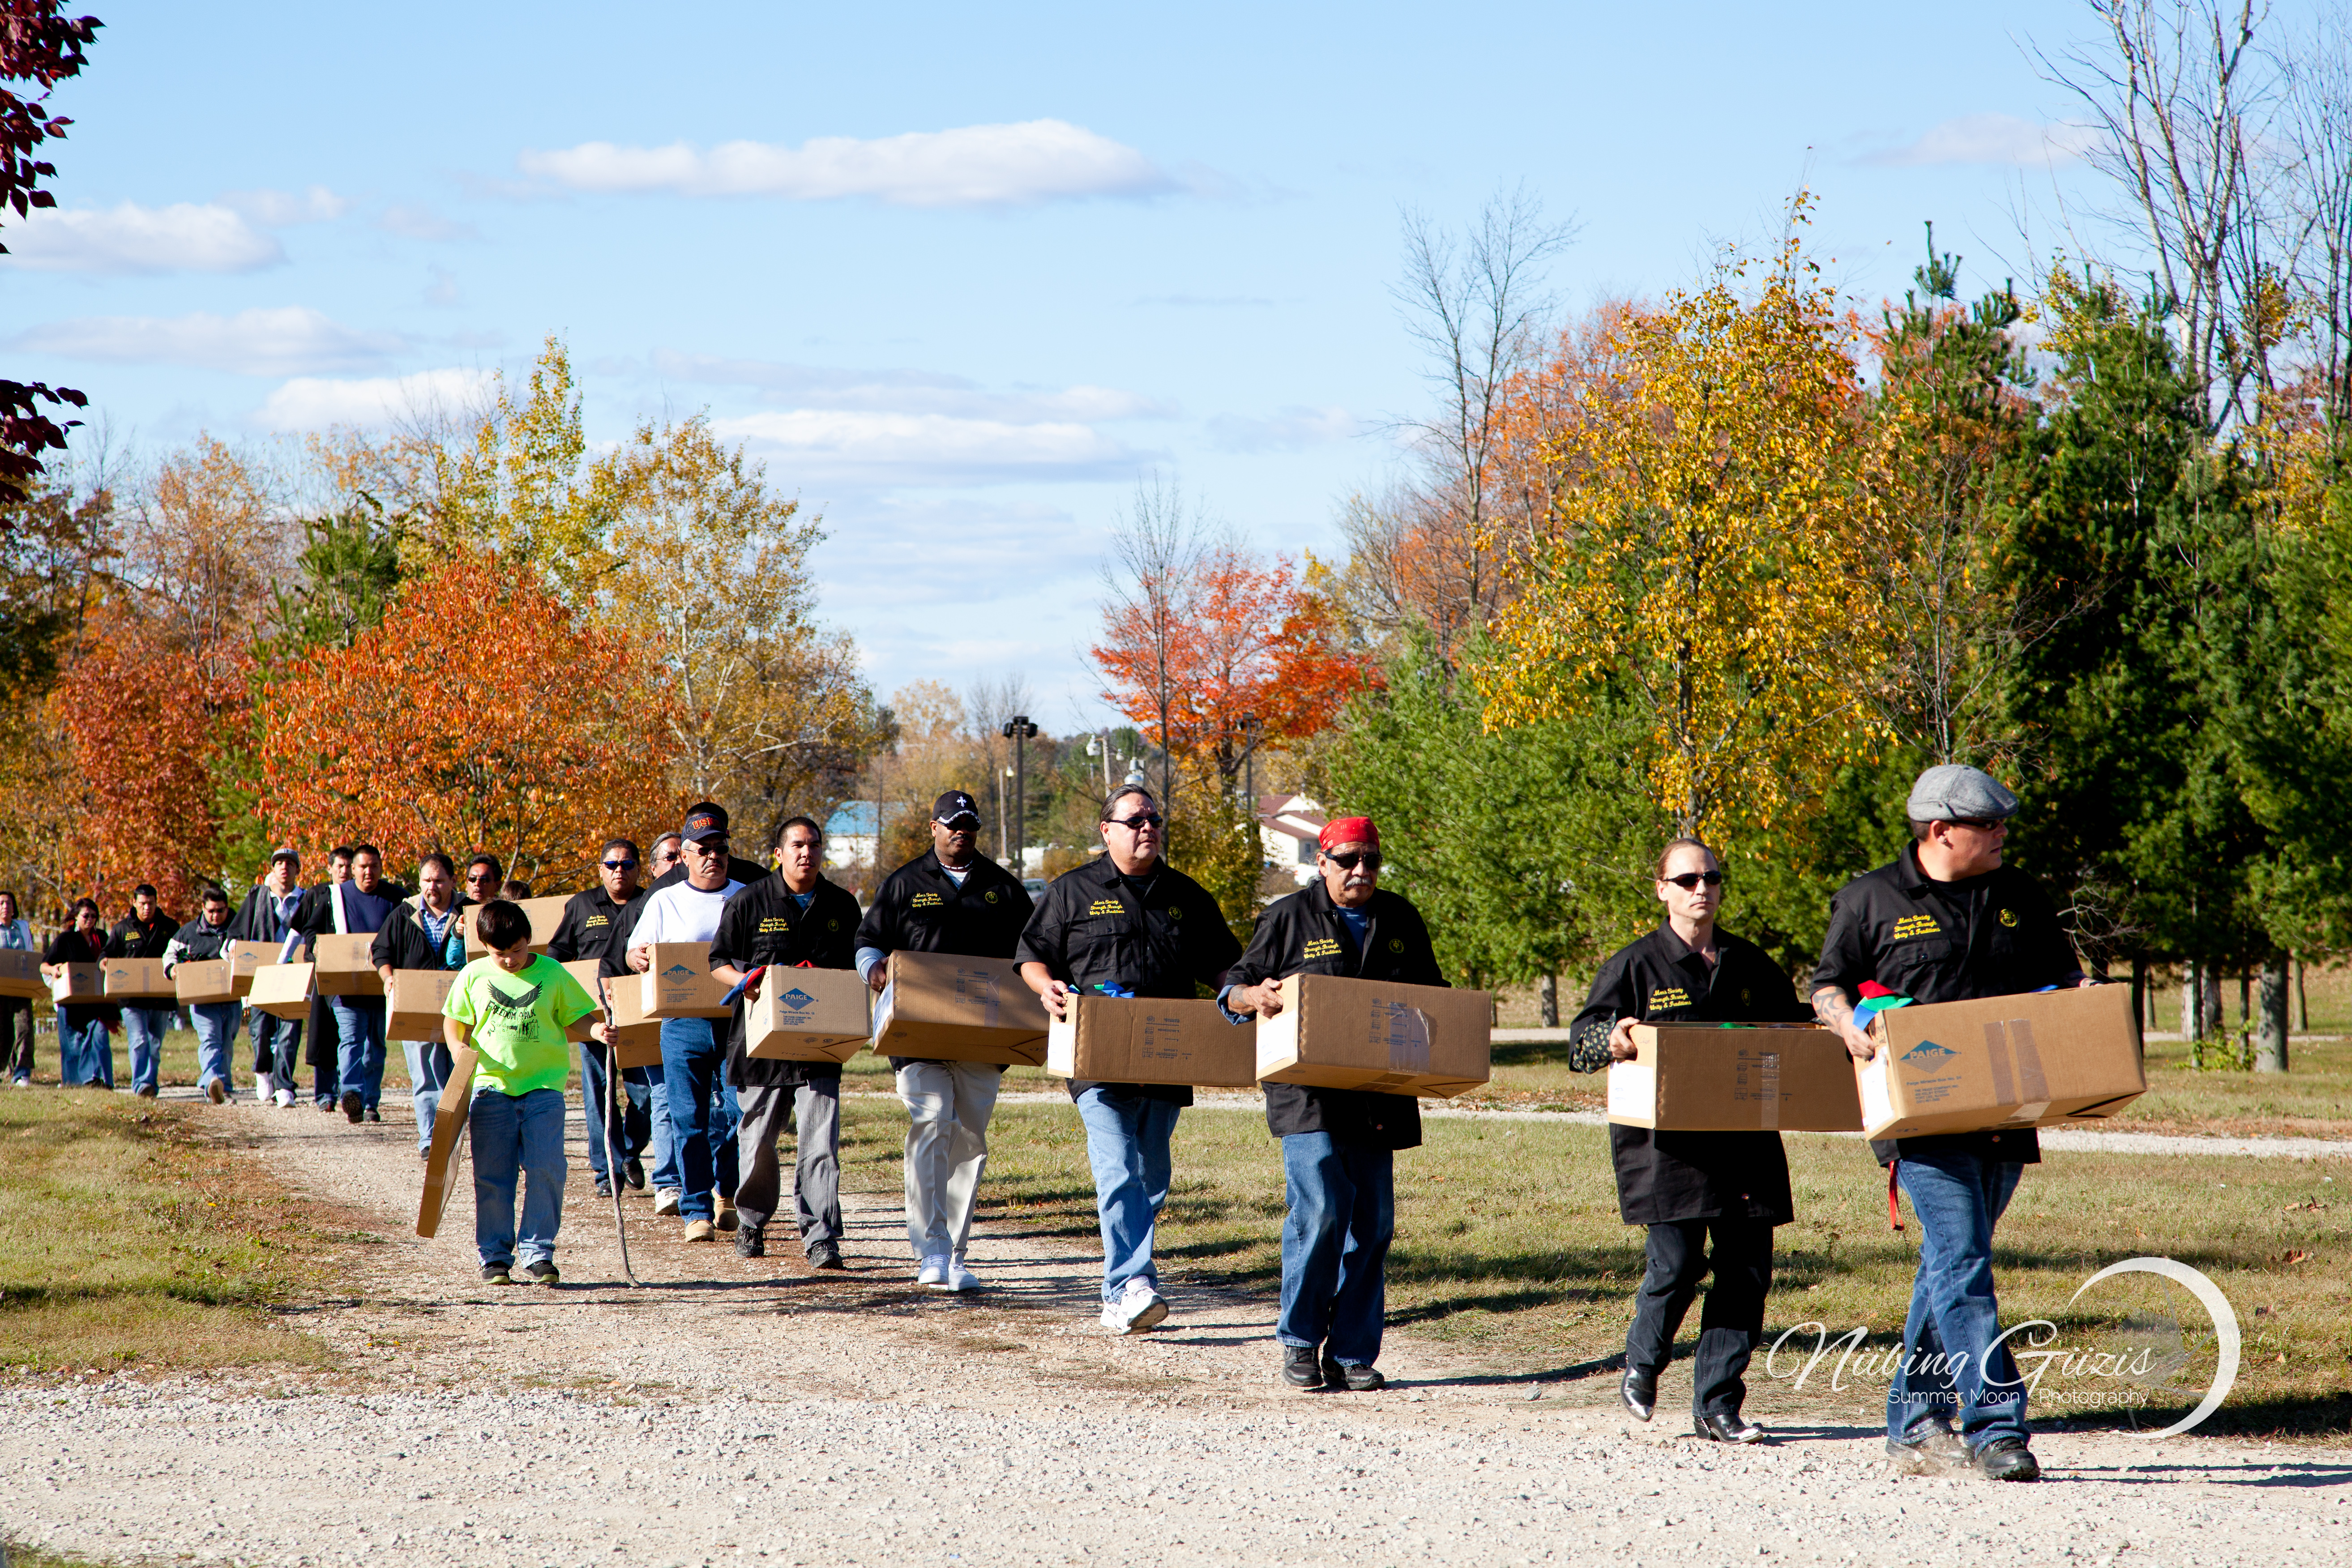 A line of people in black shirts, each carrying a cardboard box, walk single file along a trail.